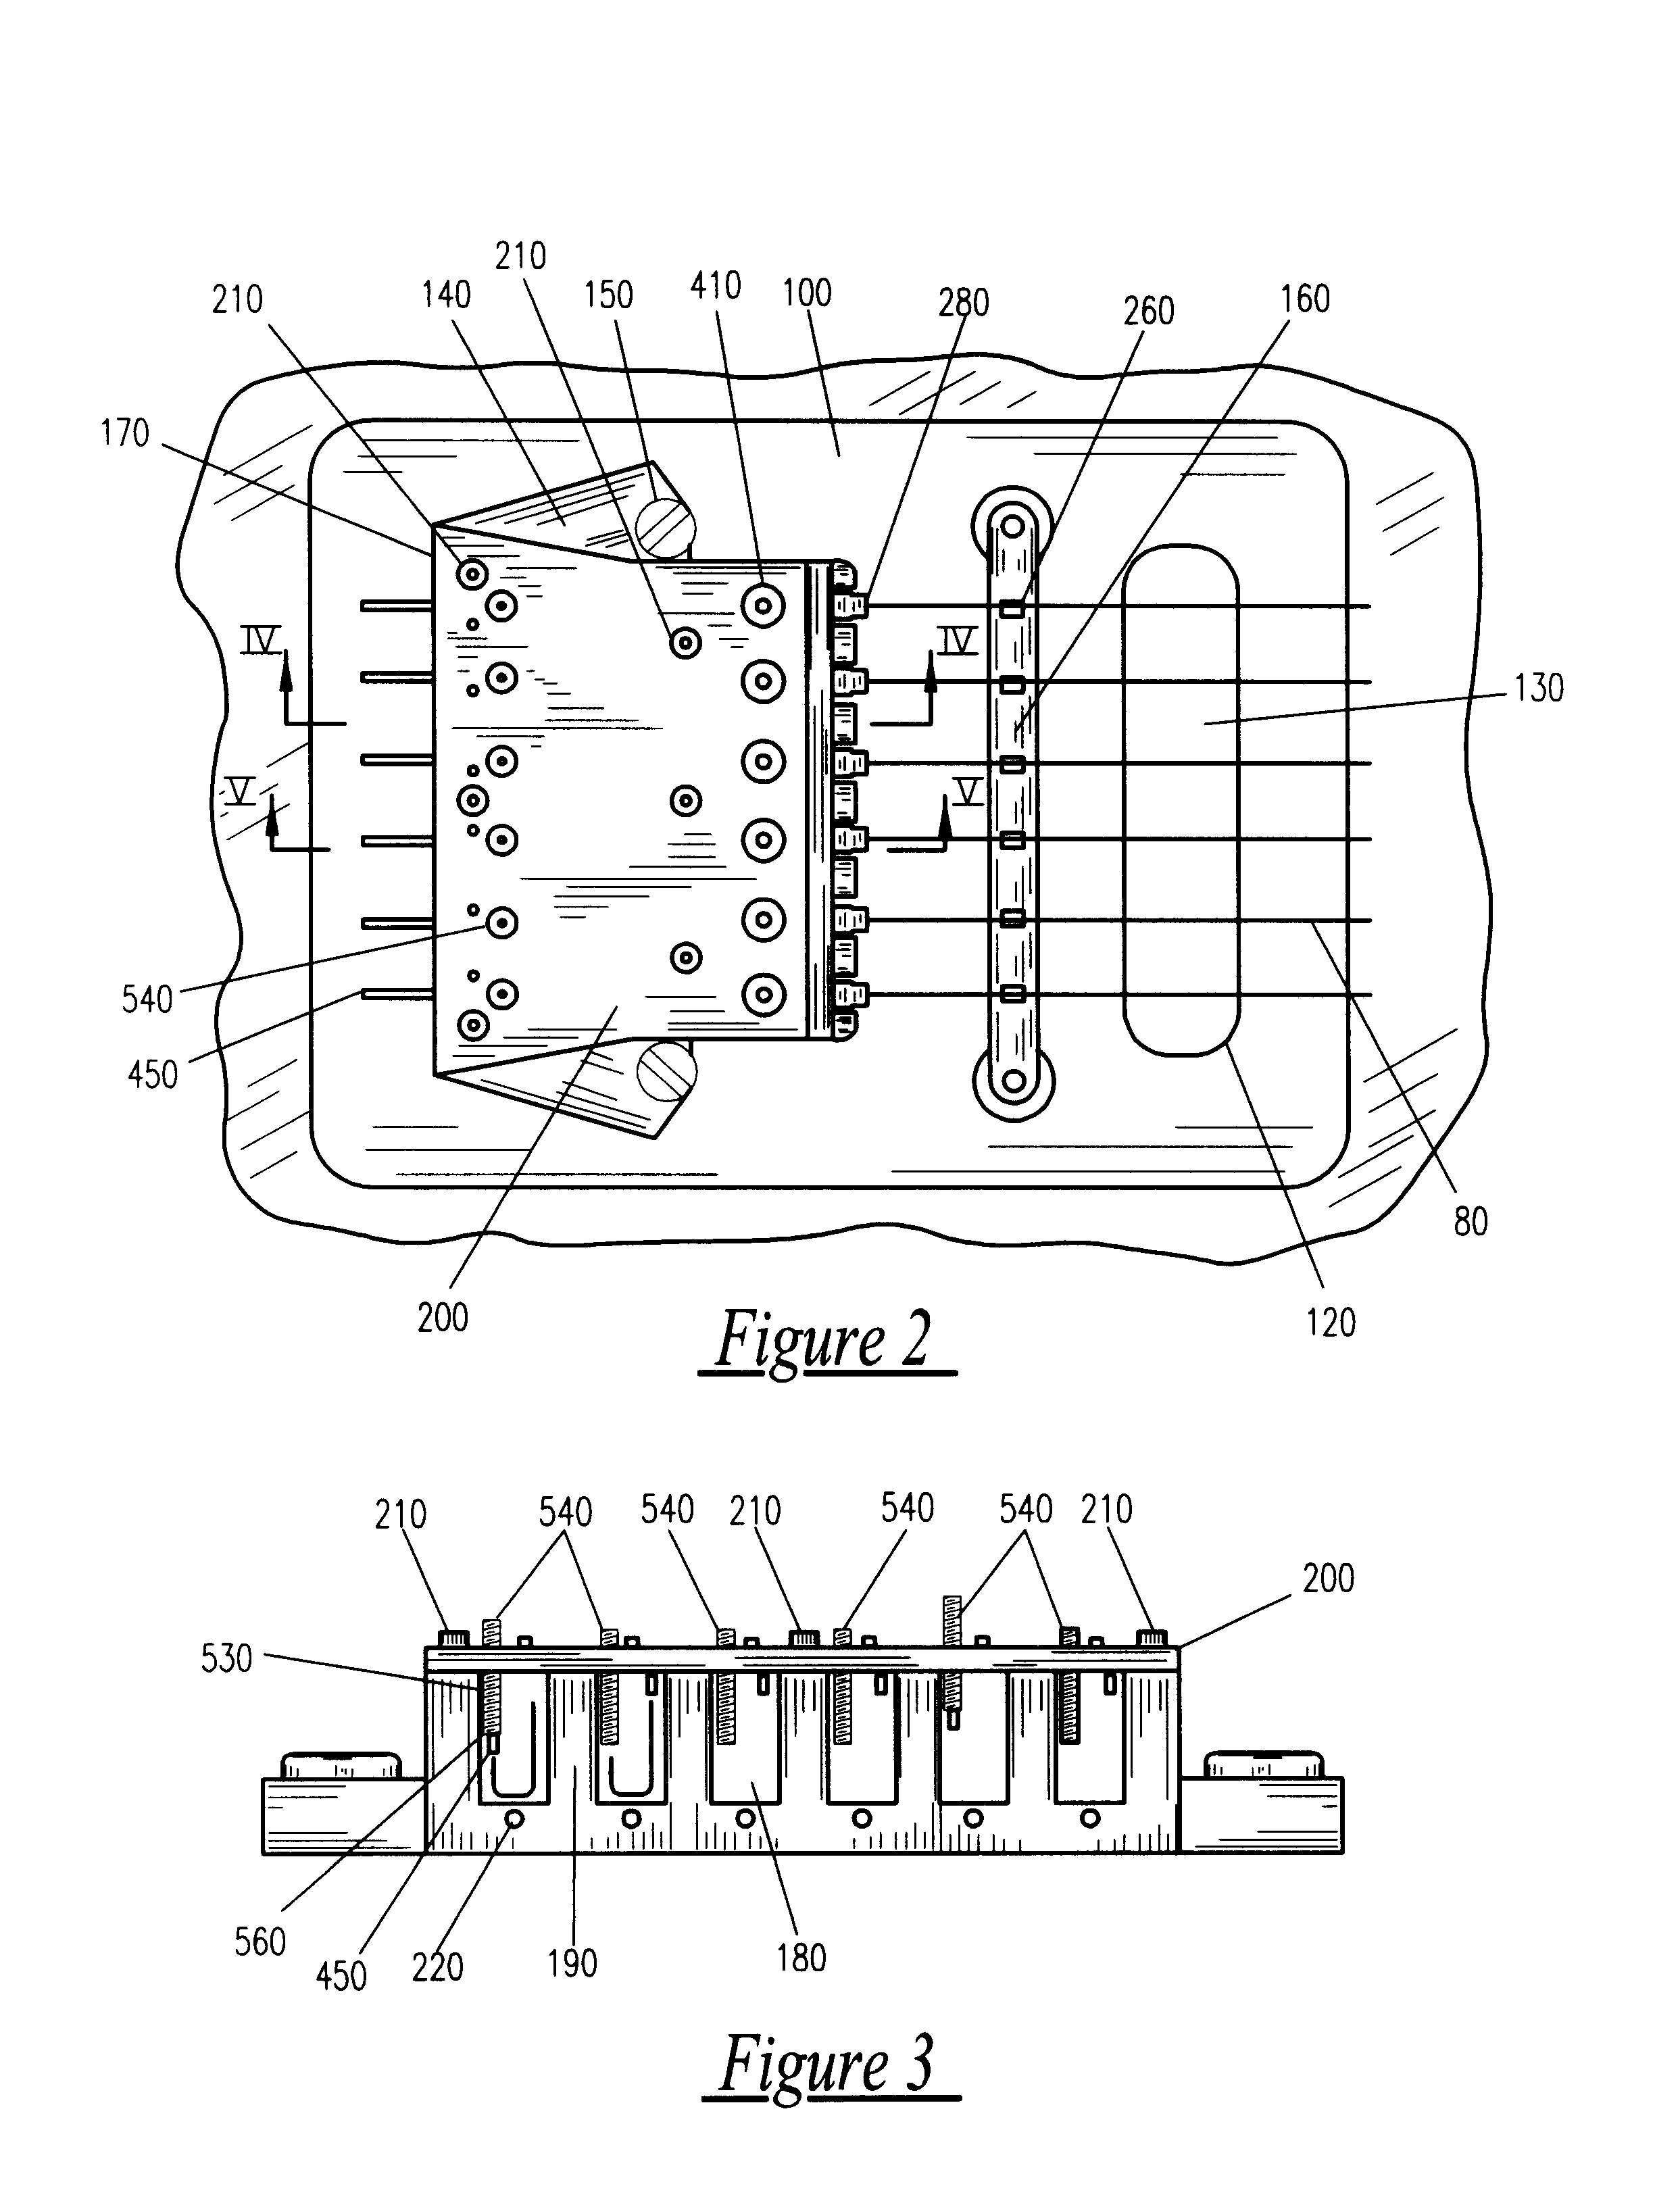 Universal, multi-position, tuning mechanism and bridge for stringed musical instruments